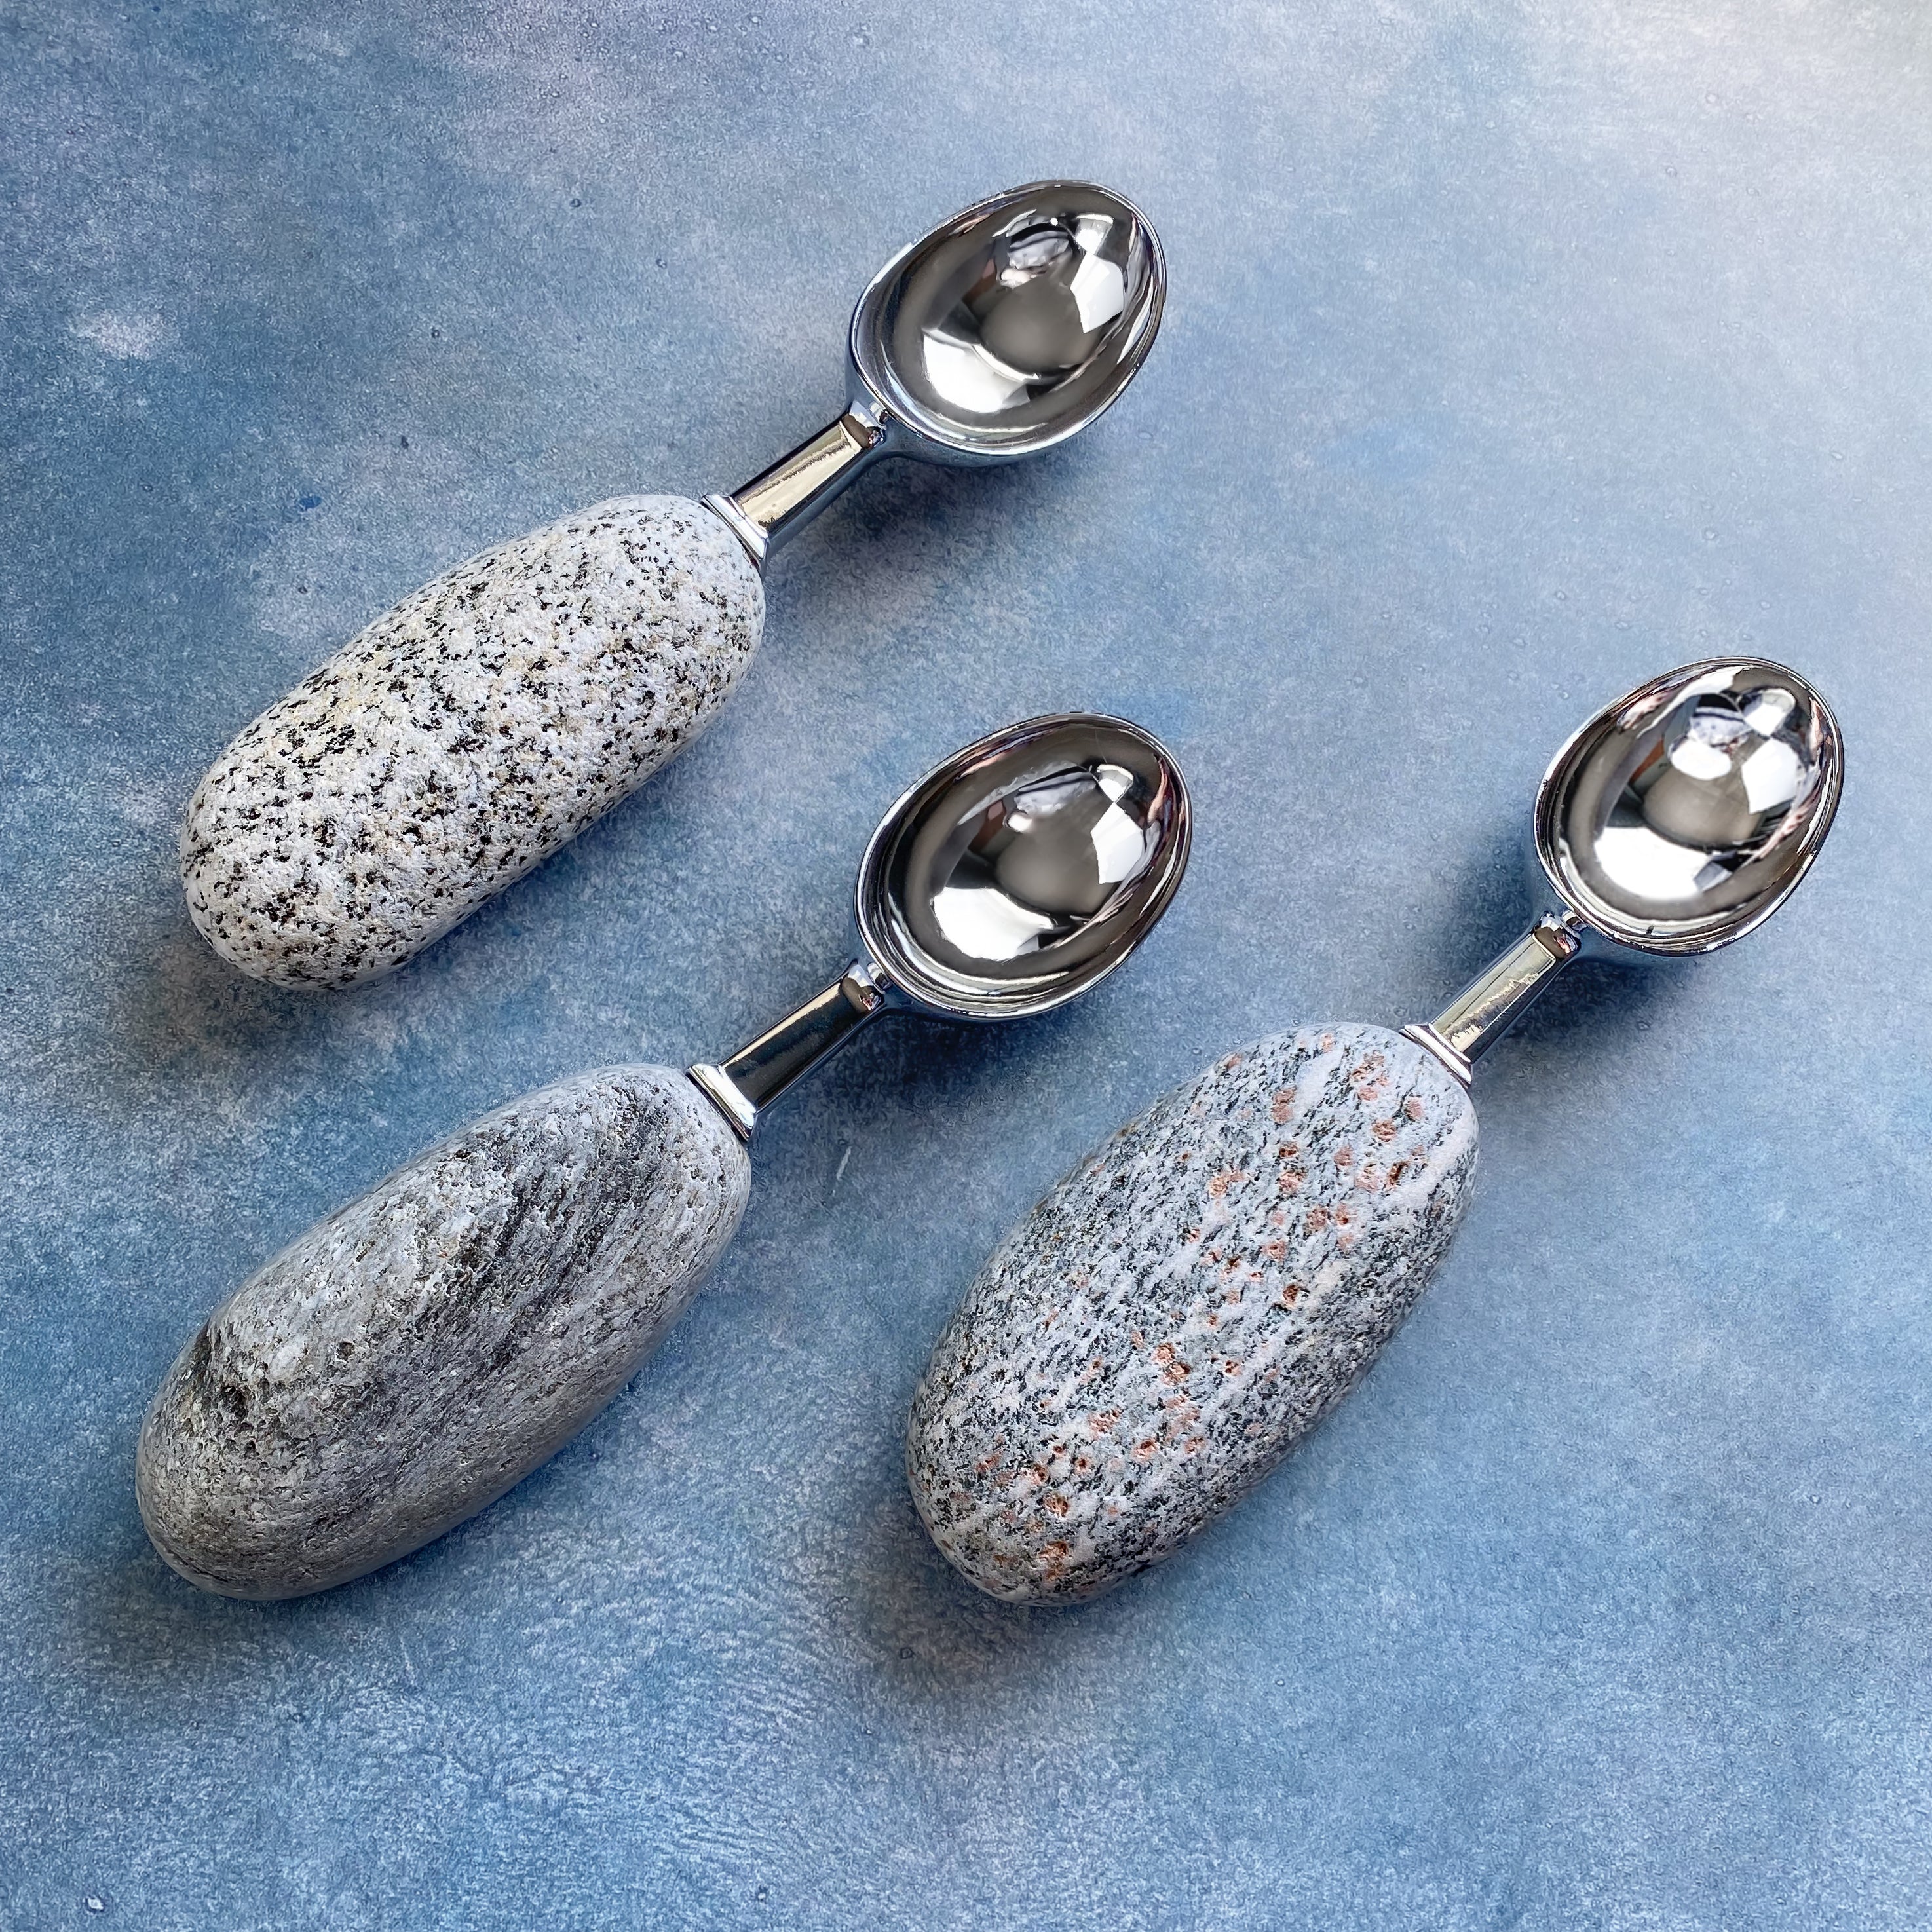 perfect quenelle spoon stainless steel strong